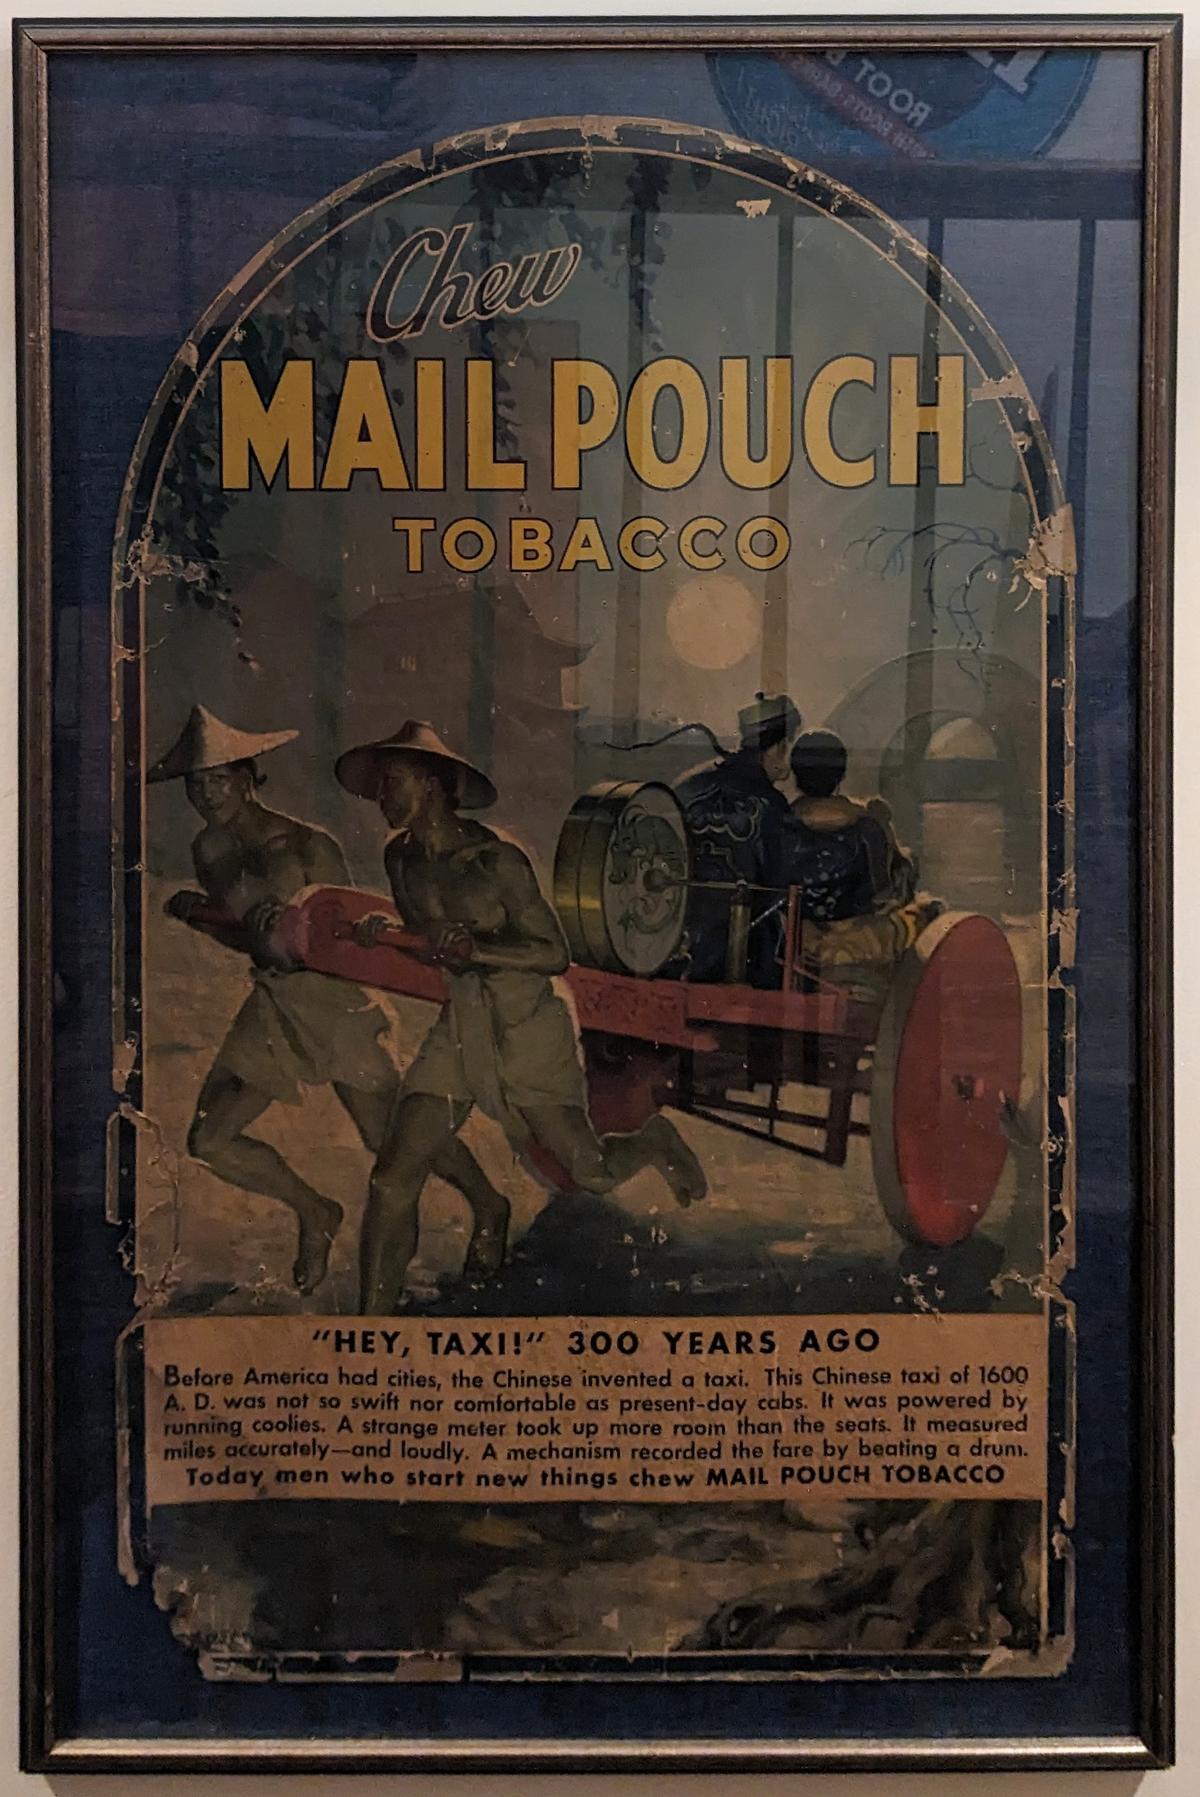 RARE FRAMED ANTIQUE MAIL POUCH TOBACCO ADVERTISEMENT 38" BY 25"